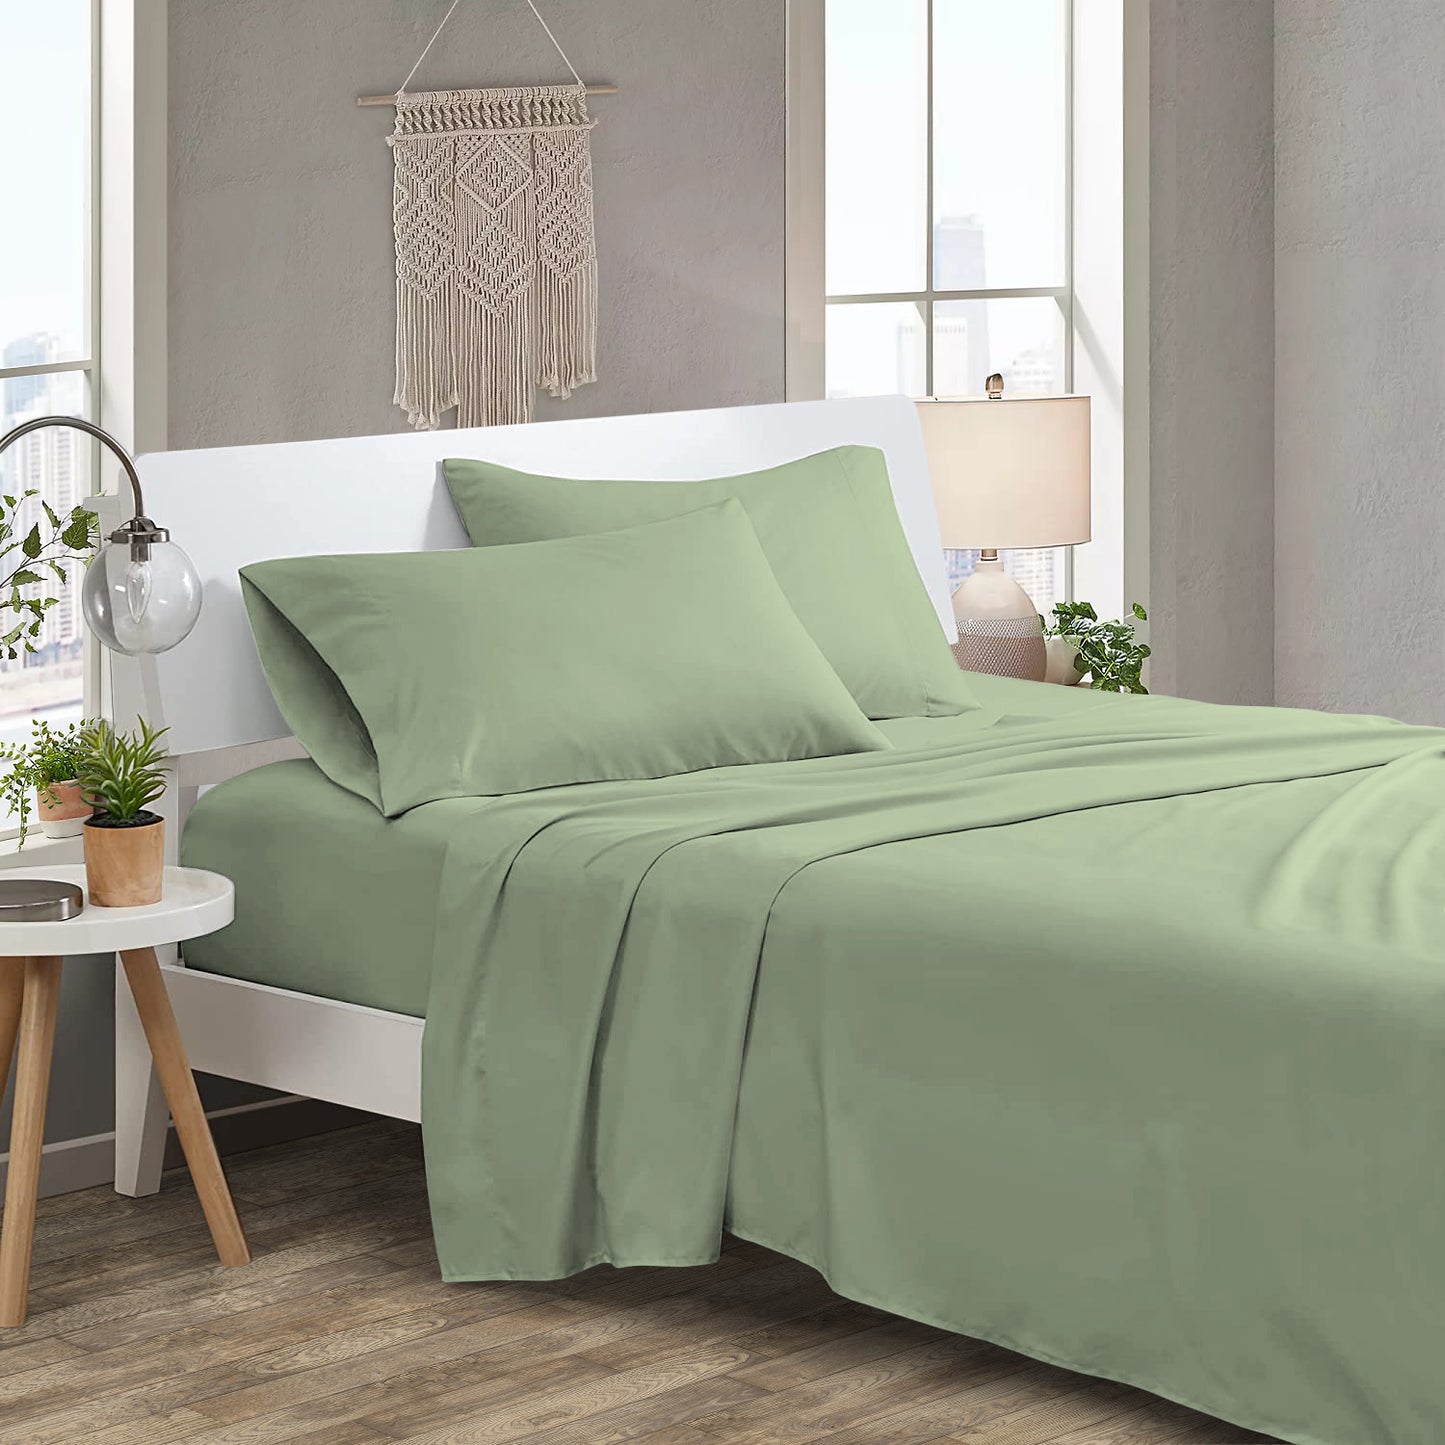 Moss Bed Sheets  Available In All Sizes – Cozy bedding